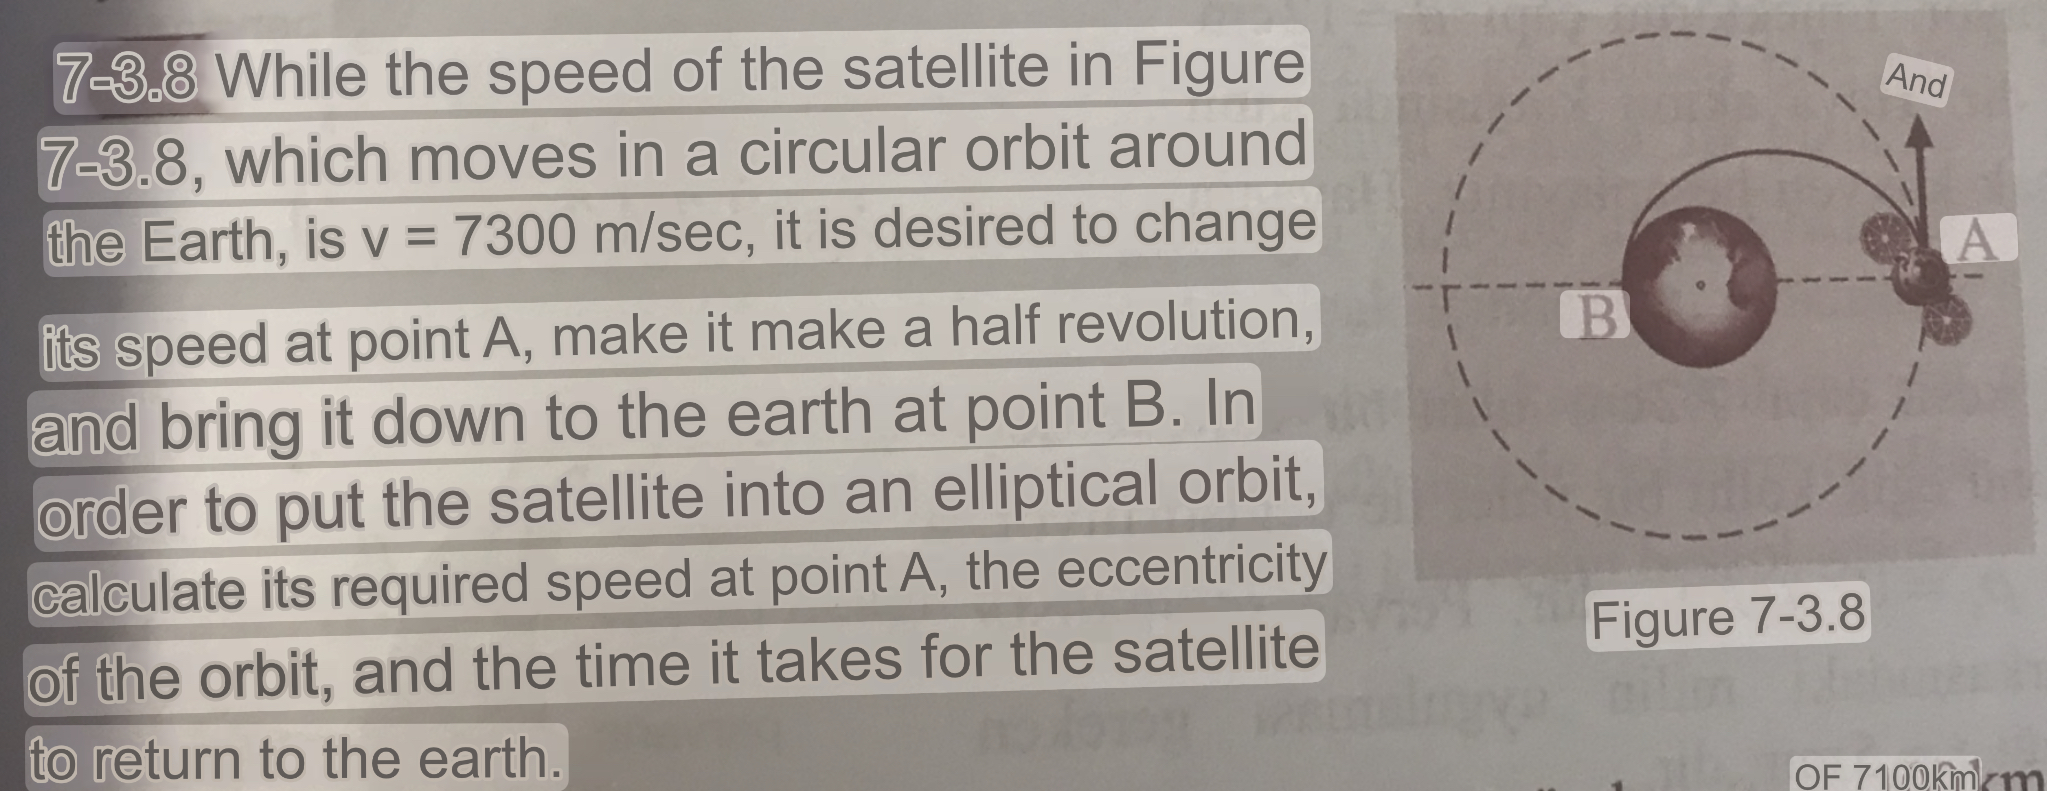 7-3.8 While the speed of the satellite in Figure 7-3.8, which moves in a circular orbit around the Earth, is